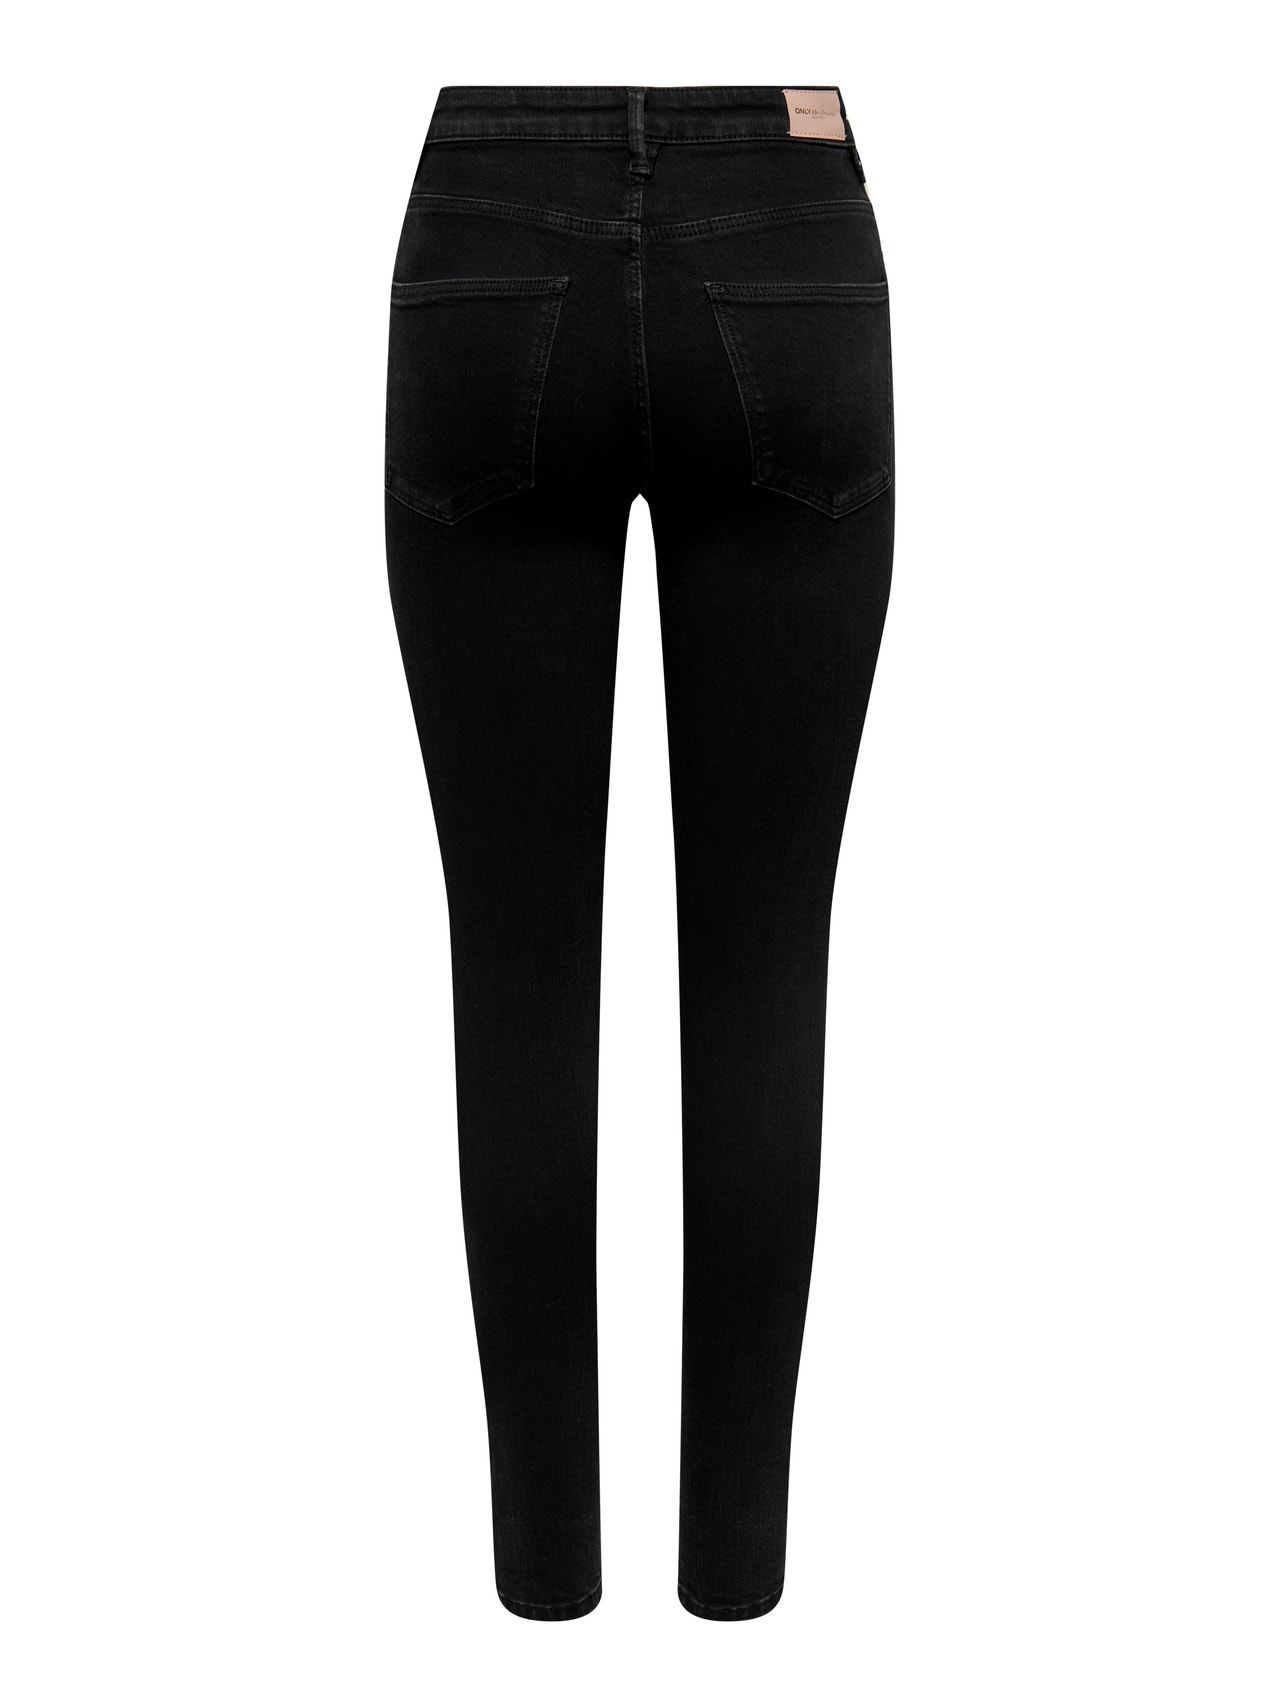 ONLY ONLICONIC High Waist SKinny LONG ANKLE Jeans -Black Denim - 15247810